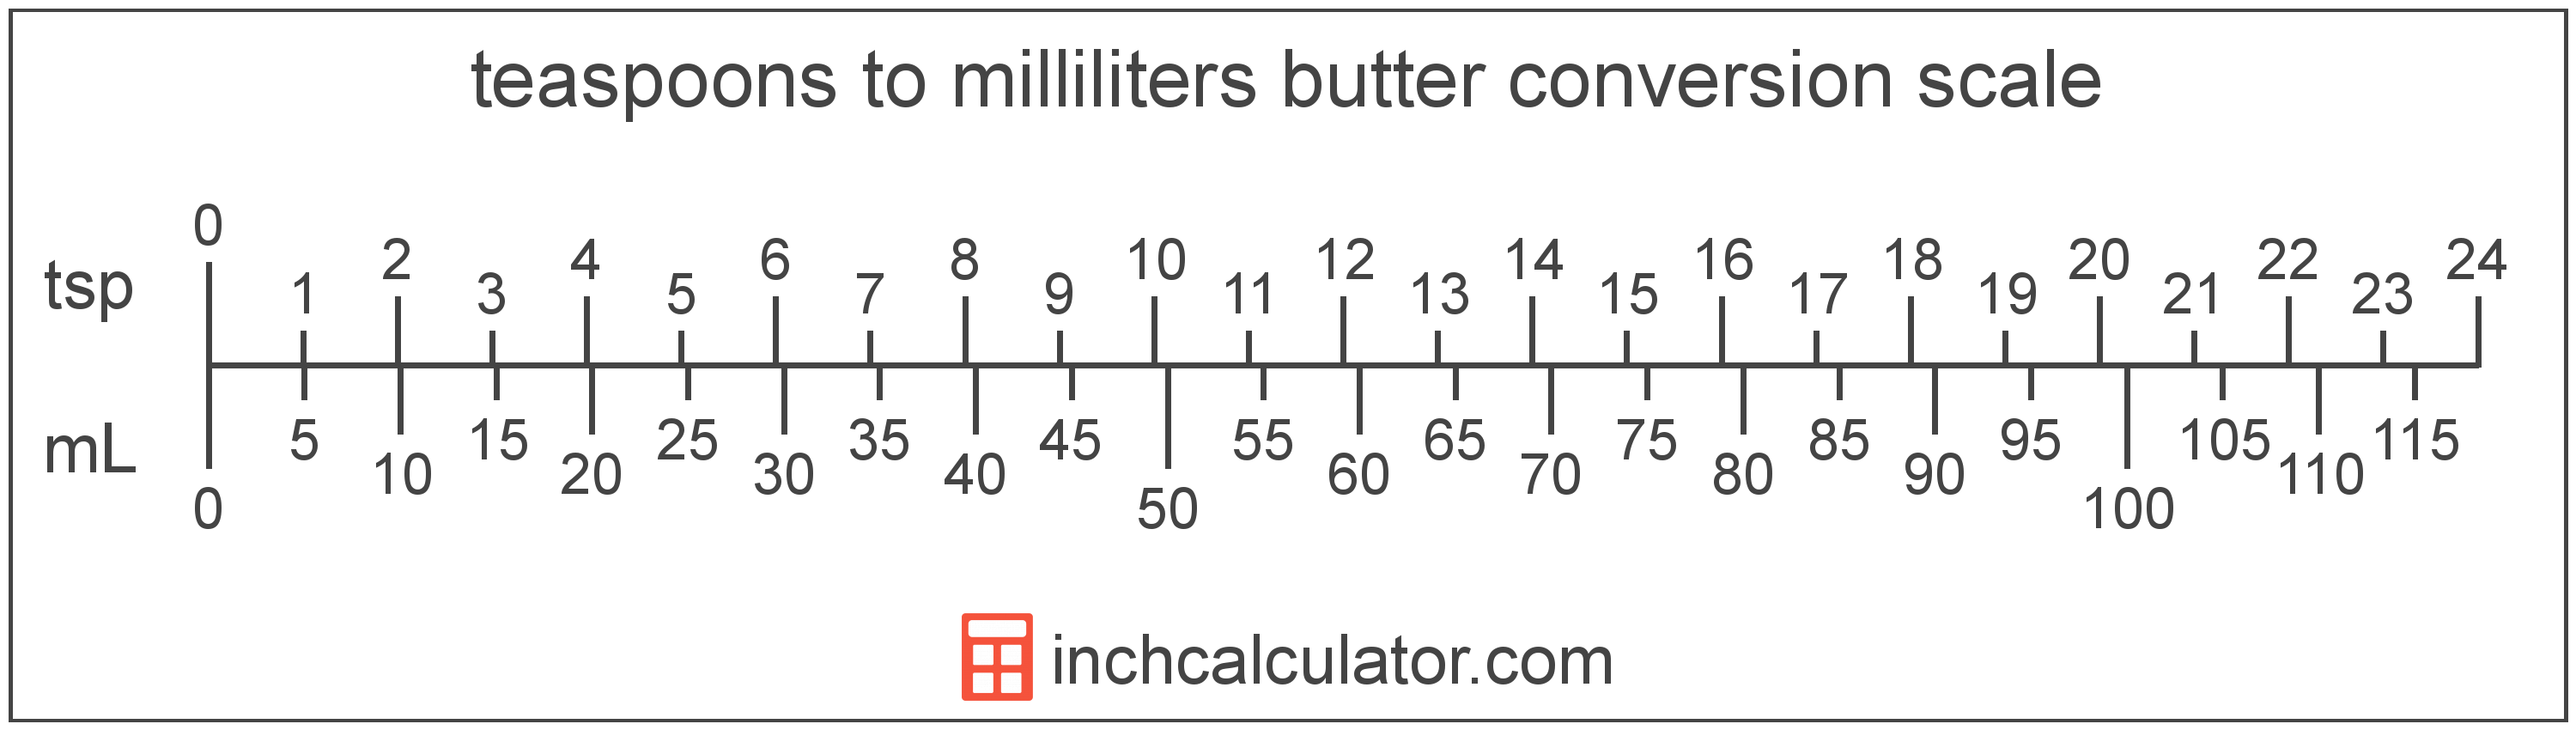 Teaspoons of Butter to Milliliters Conversion (tsp to mL)